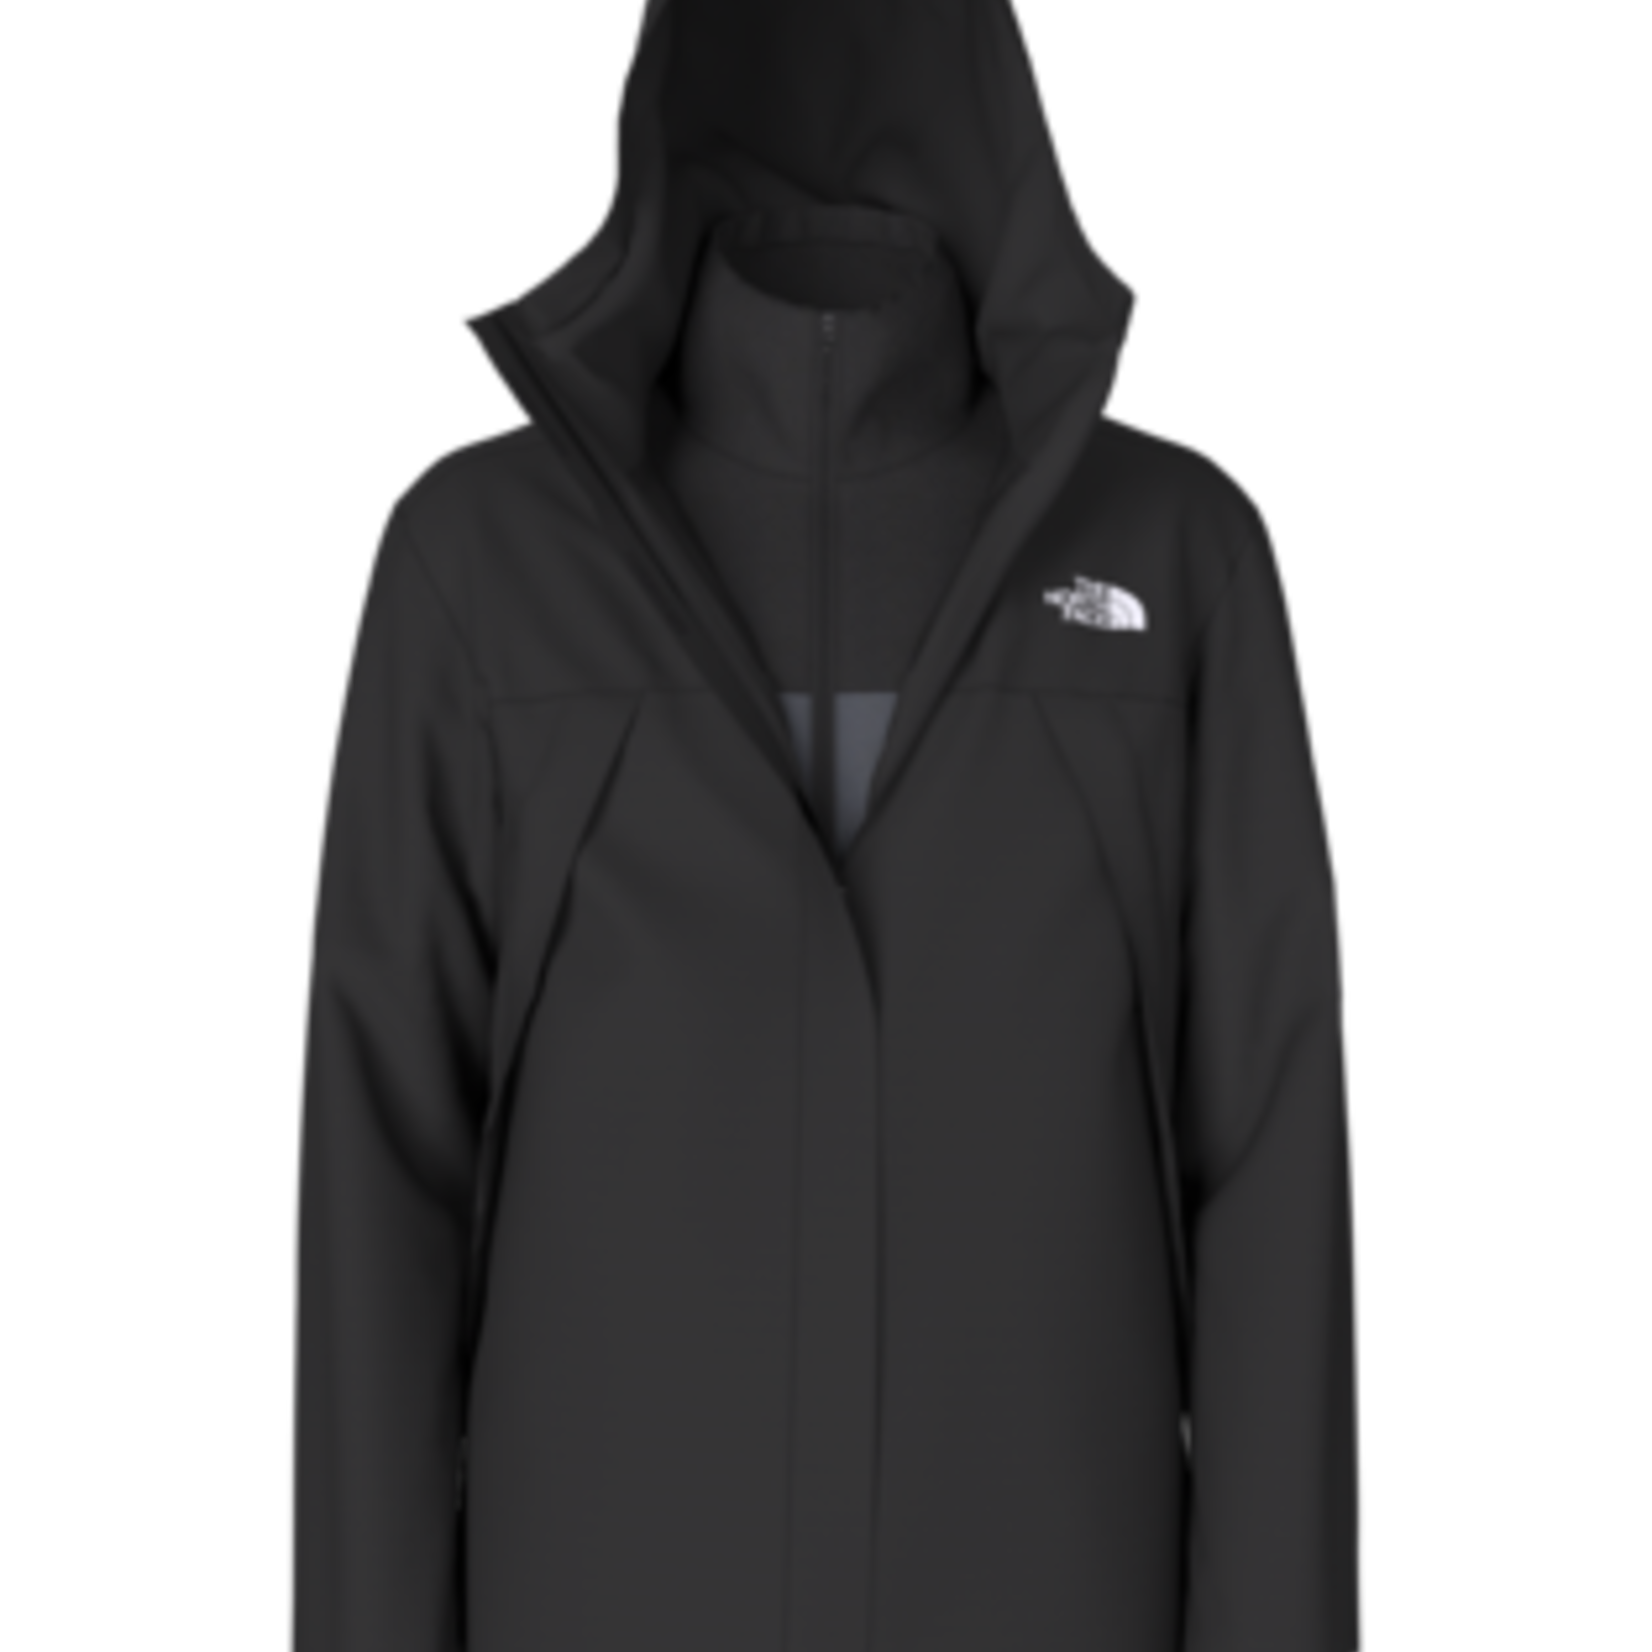 The North Face The North Face Winter Jacket, Antora Triclimate, Mens